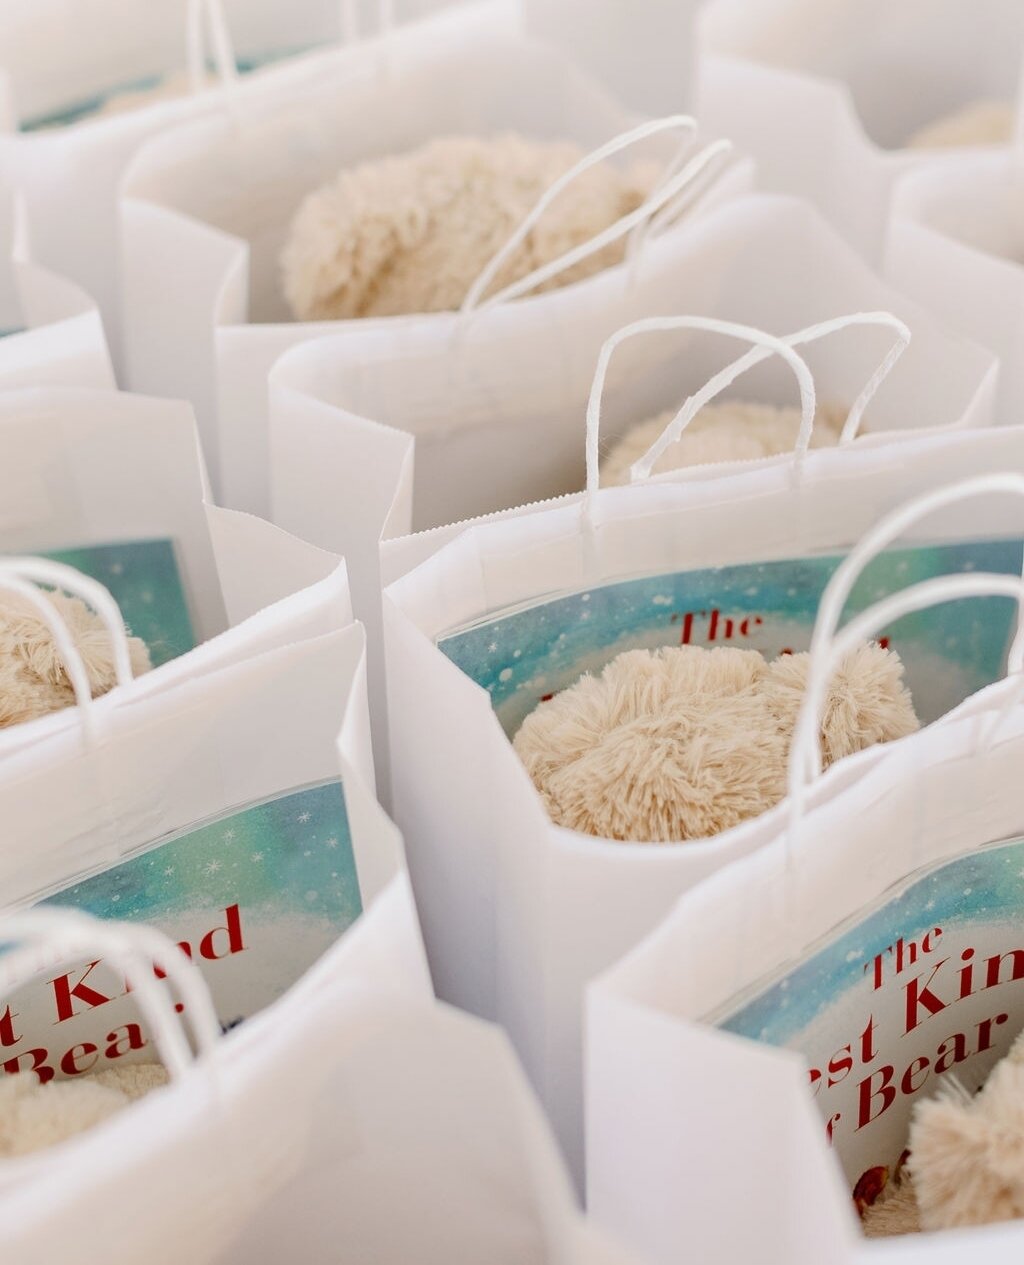 Make your guests feel extra special with personalized party favors! Take a look at these adorable teddy bear and book combo! We love being able to create unique favors that perfectly match each event.⁠
.⁠
.⁠
.⁠
Credit where credit is due:⁠
Design/ pl